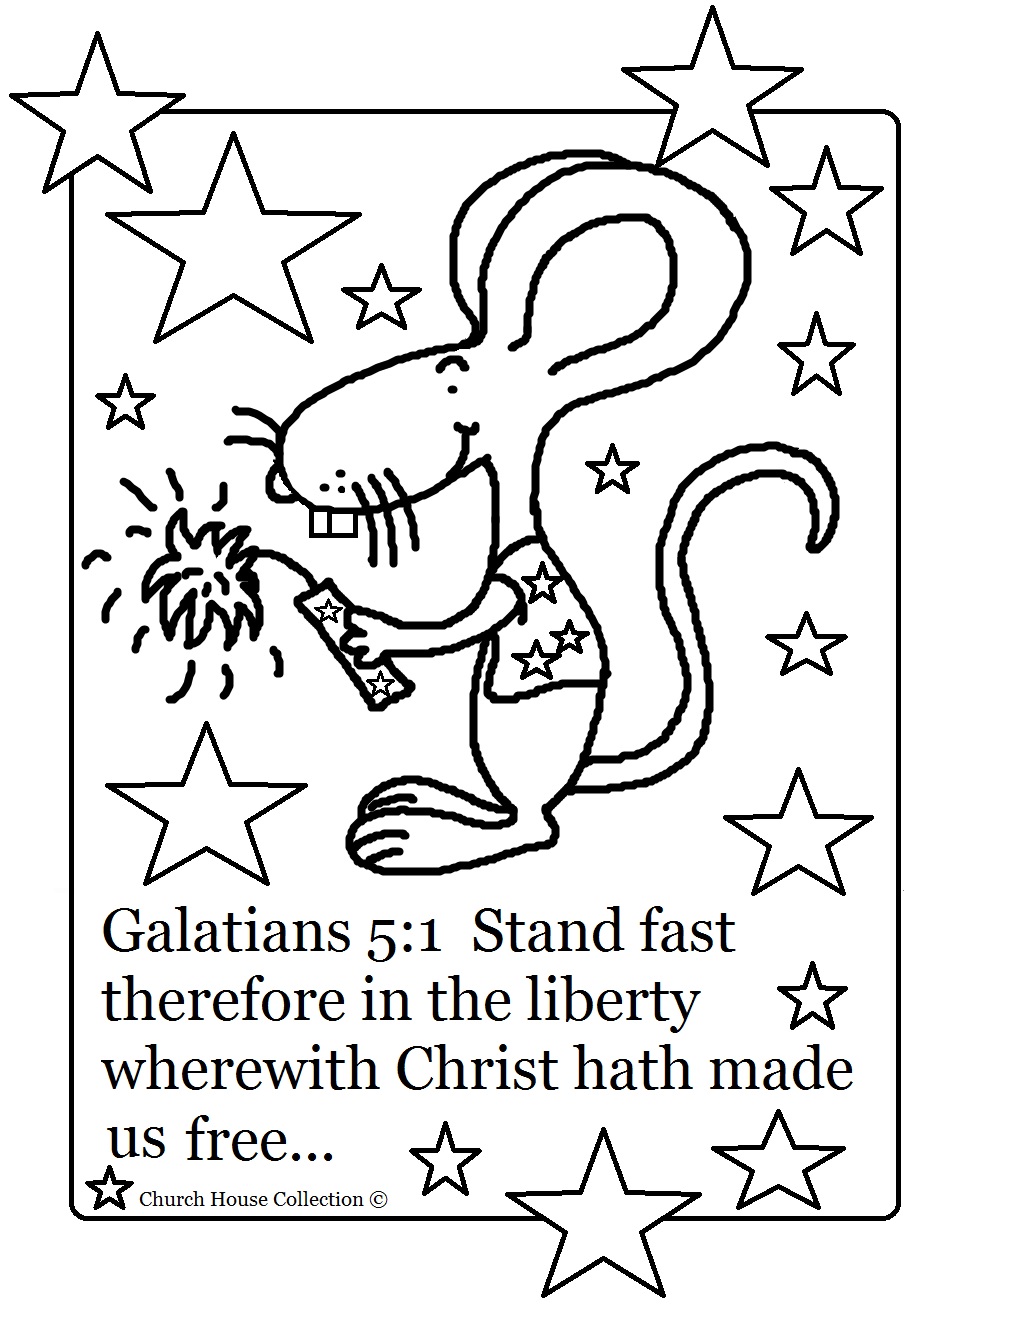 church-house-collection-blog-fourth-of-july-coloring-pages-for-sunday